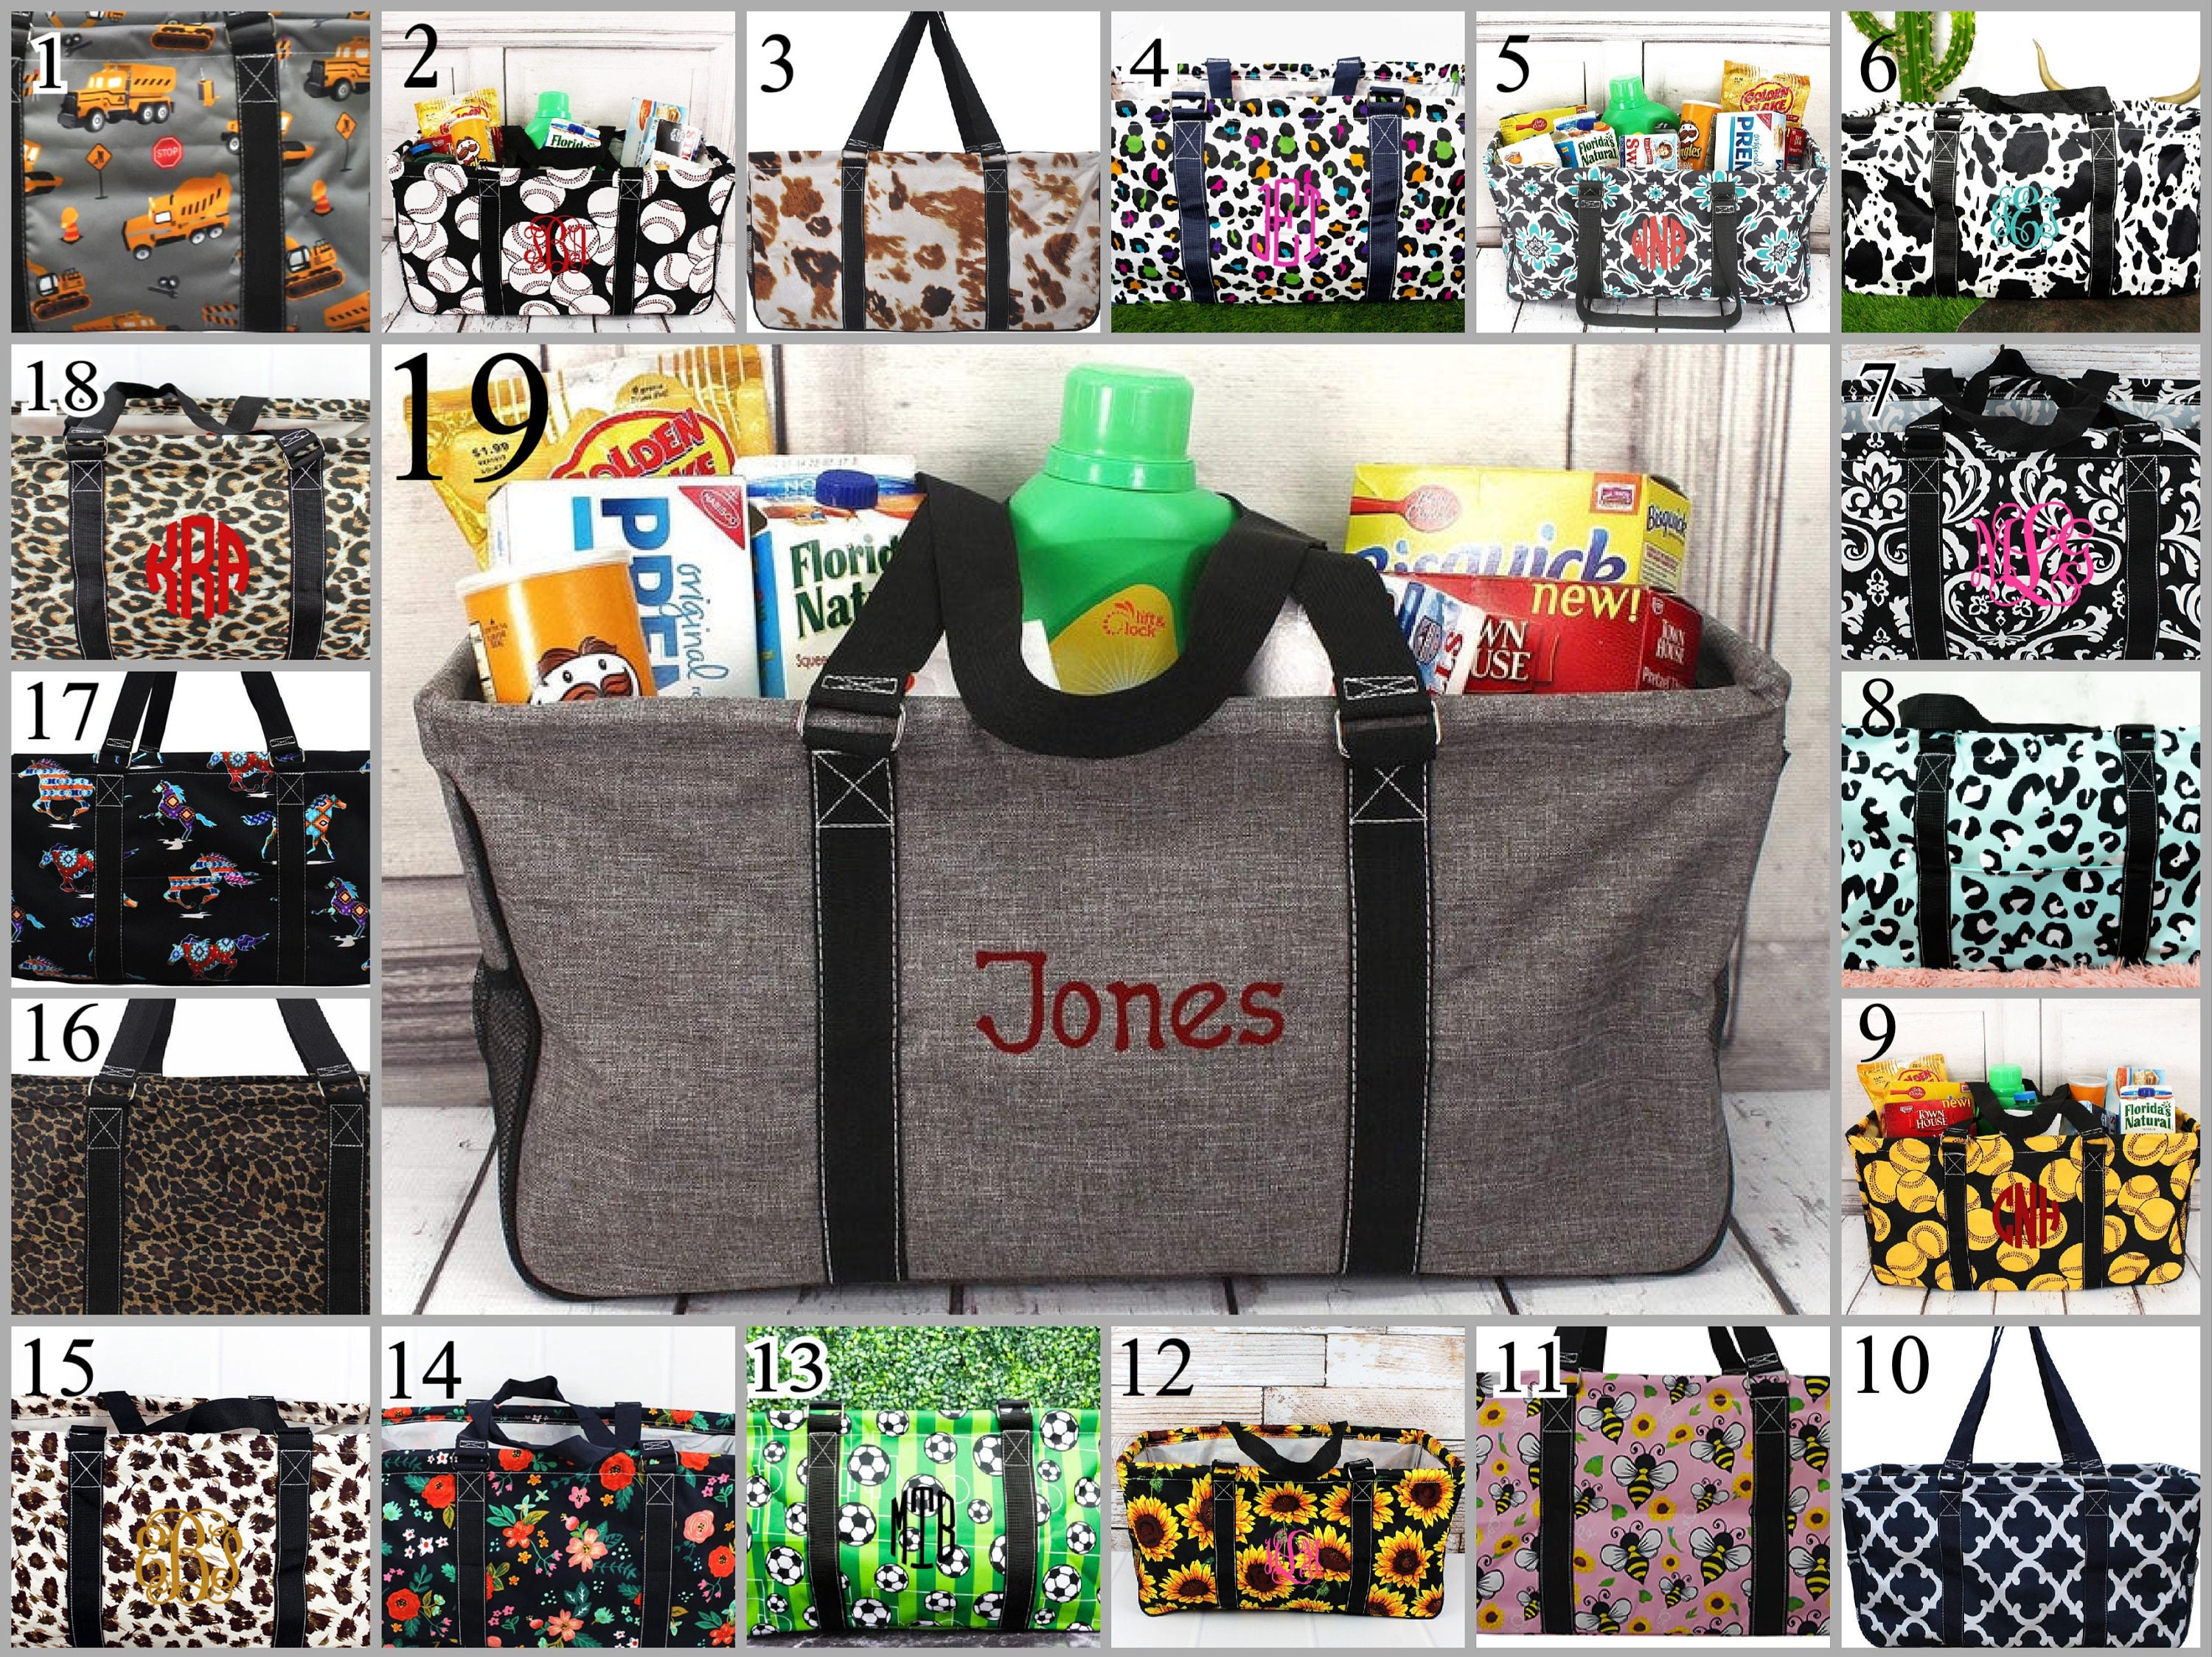 All In Neutral - Large Utility Tote - Thirty-One Gifts - Affordable Purses,  Totes & Bags